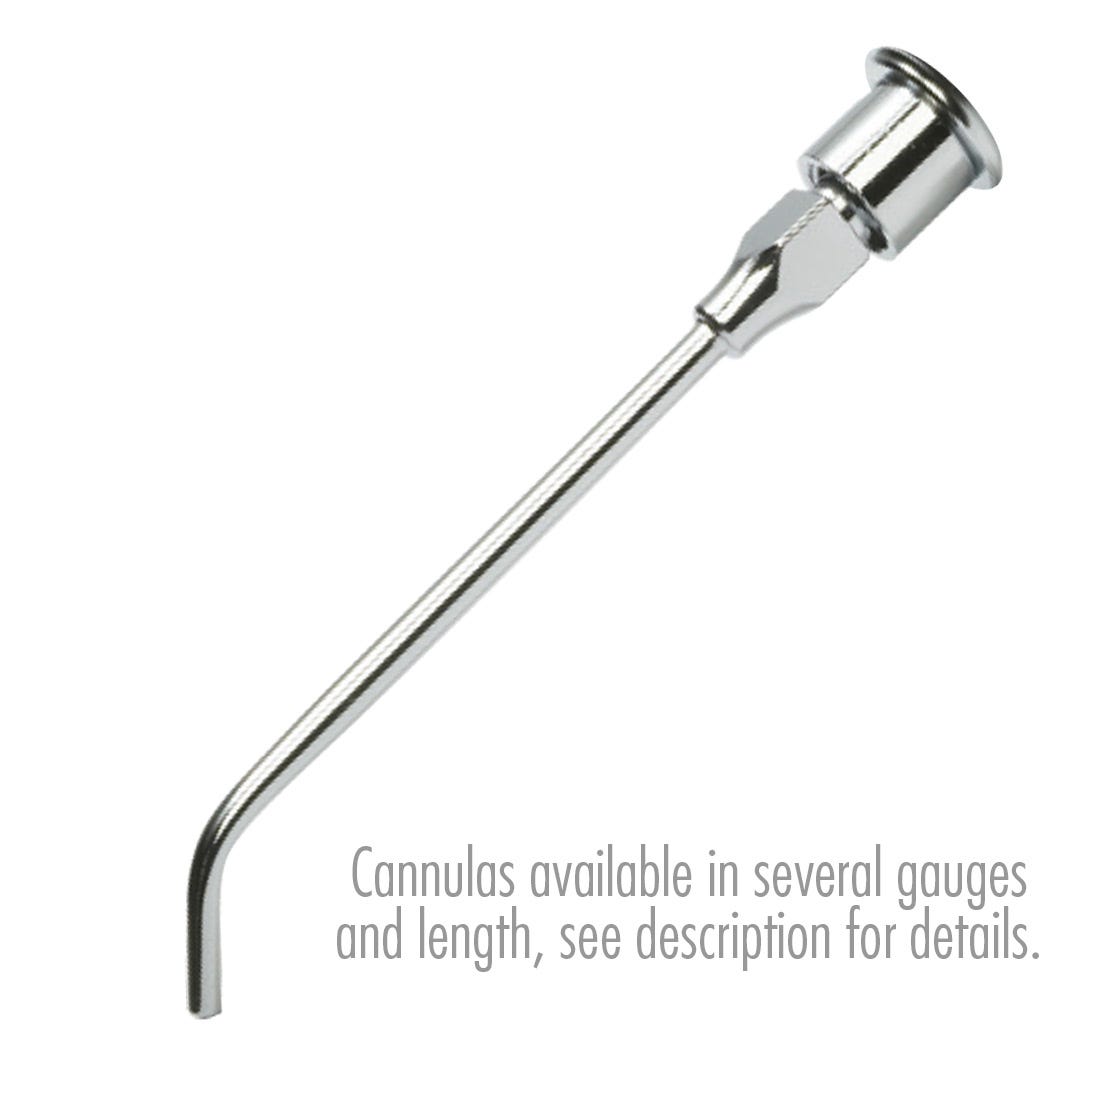 ACE Irrigation Cannula - Stainless Steel 12G x 2", 45 degree angle